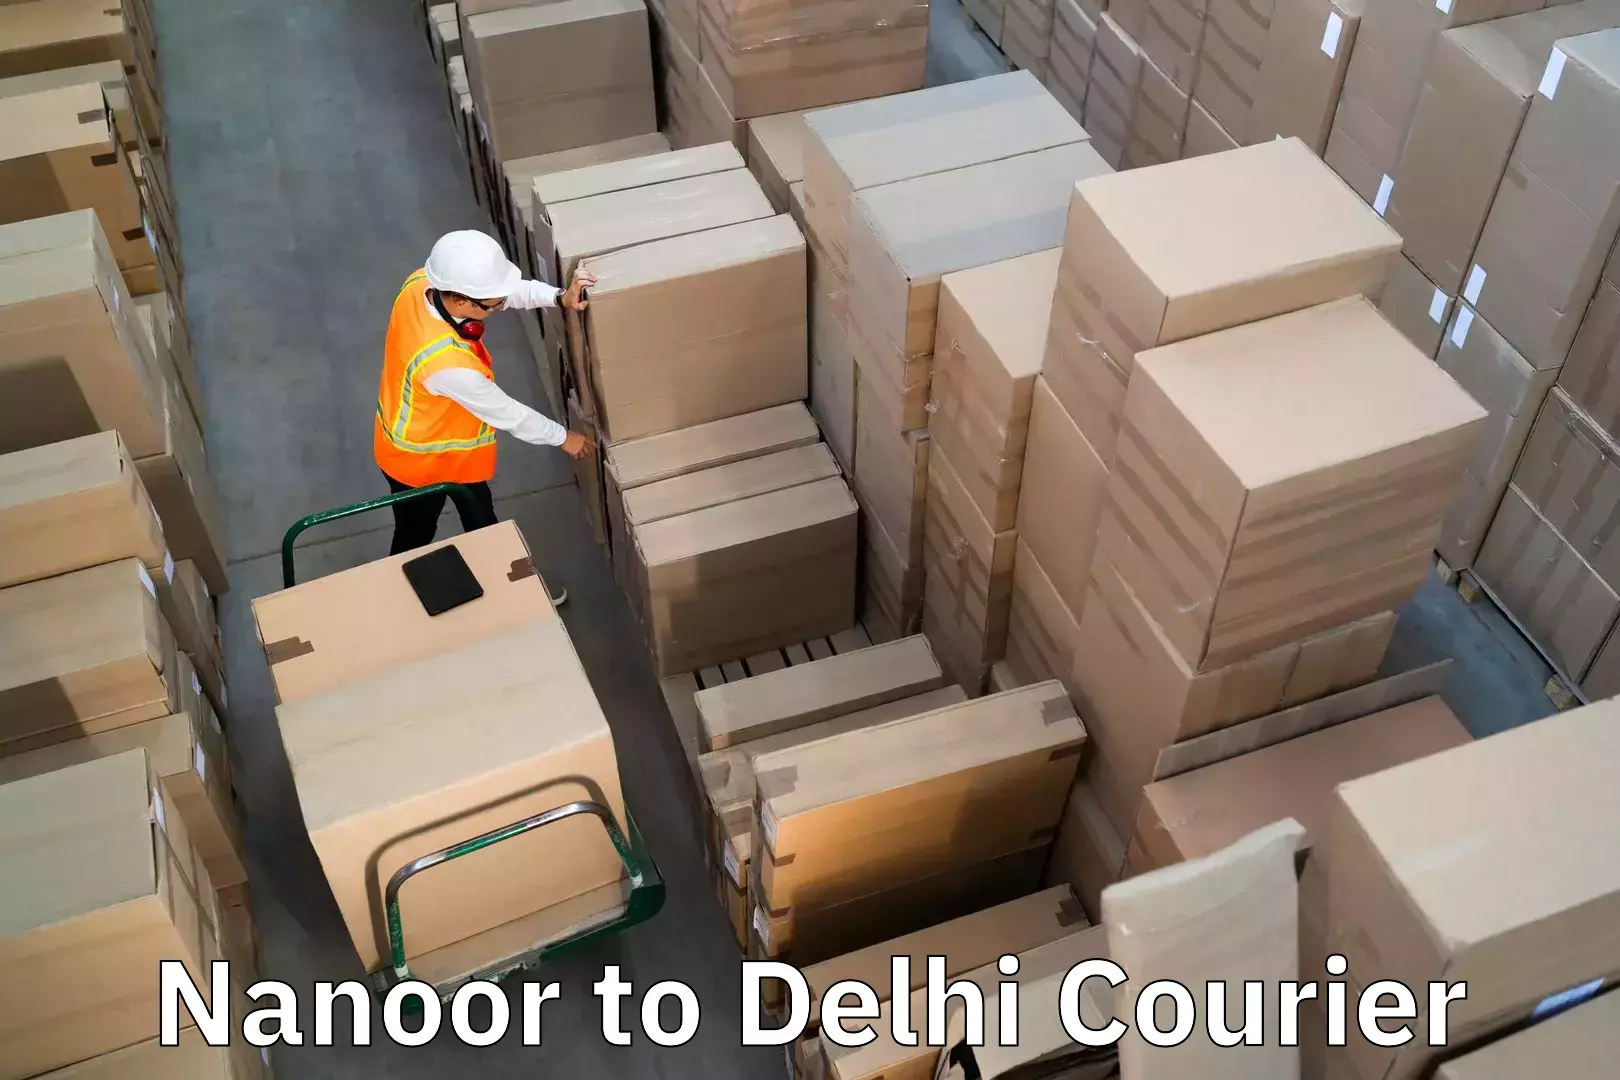 Same day luggage service Nanoor to NCR